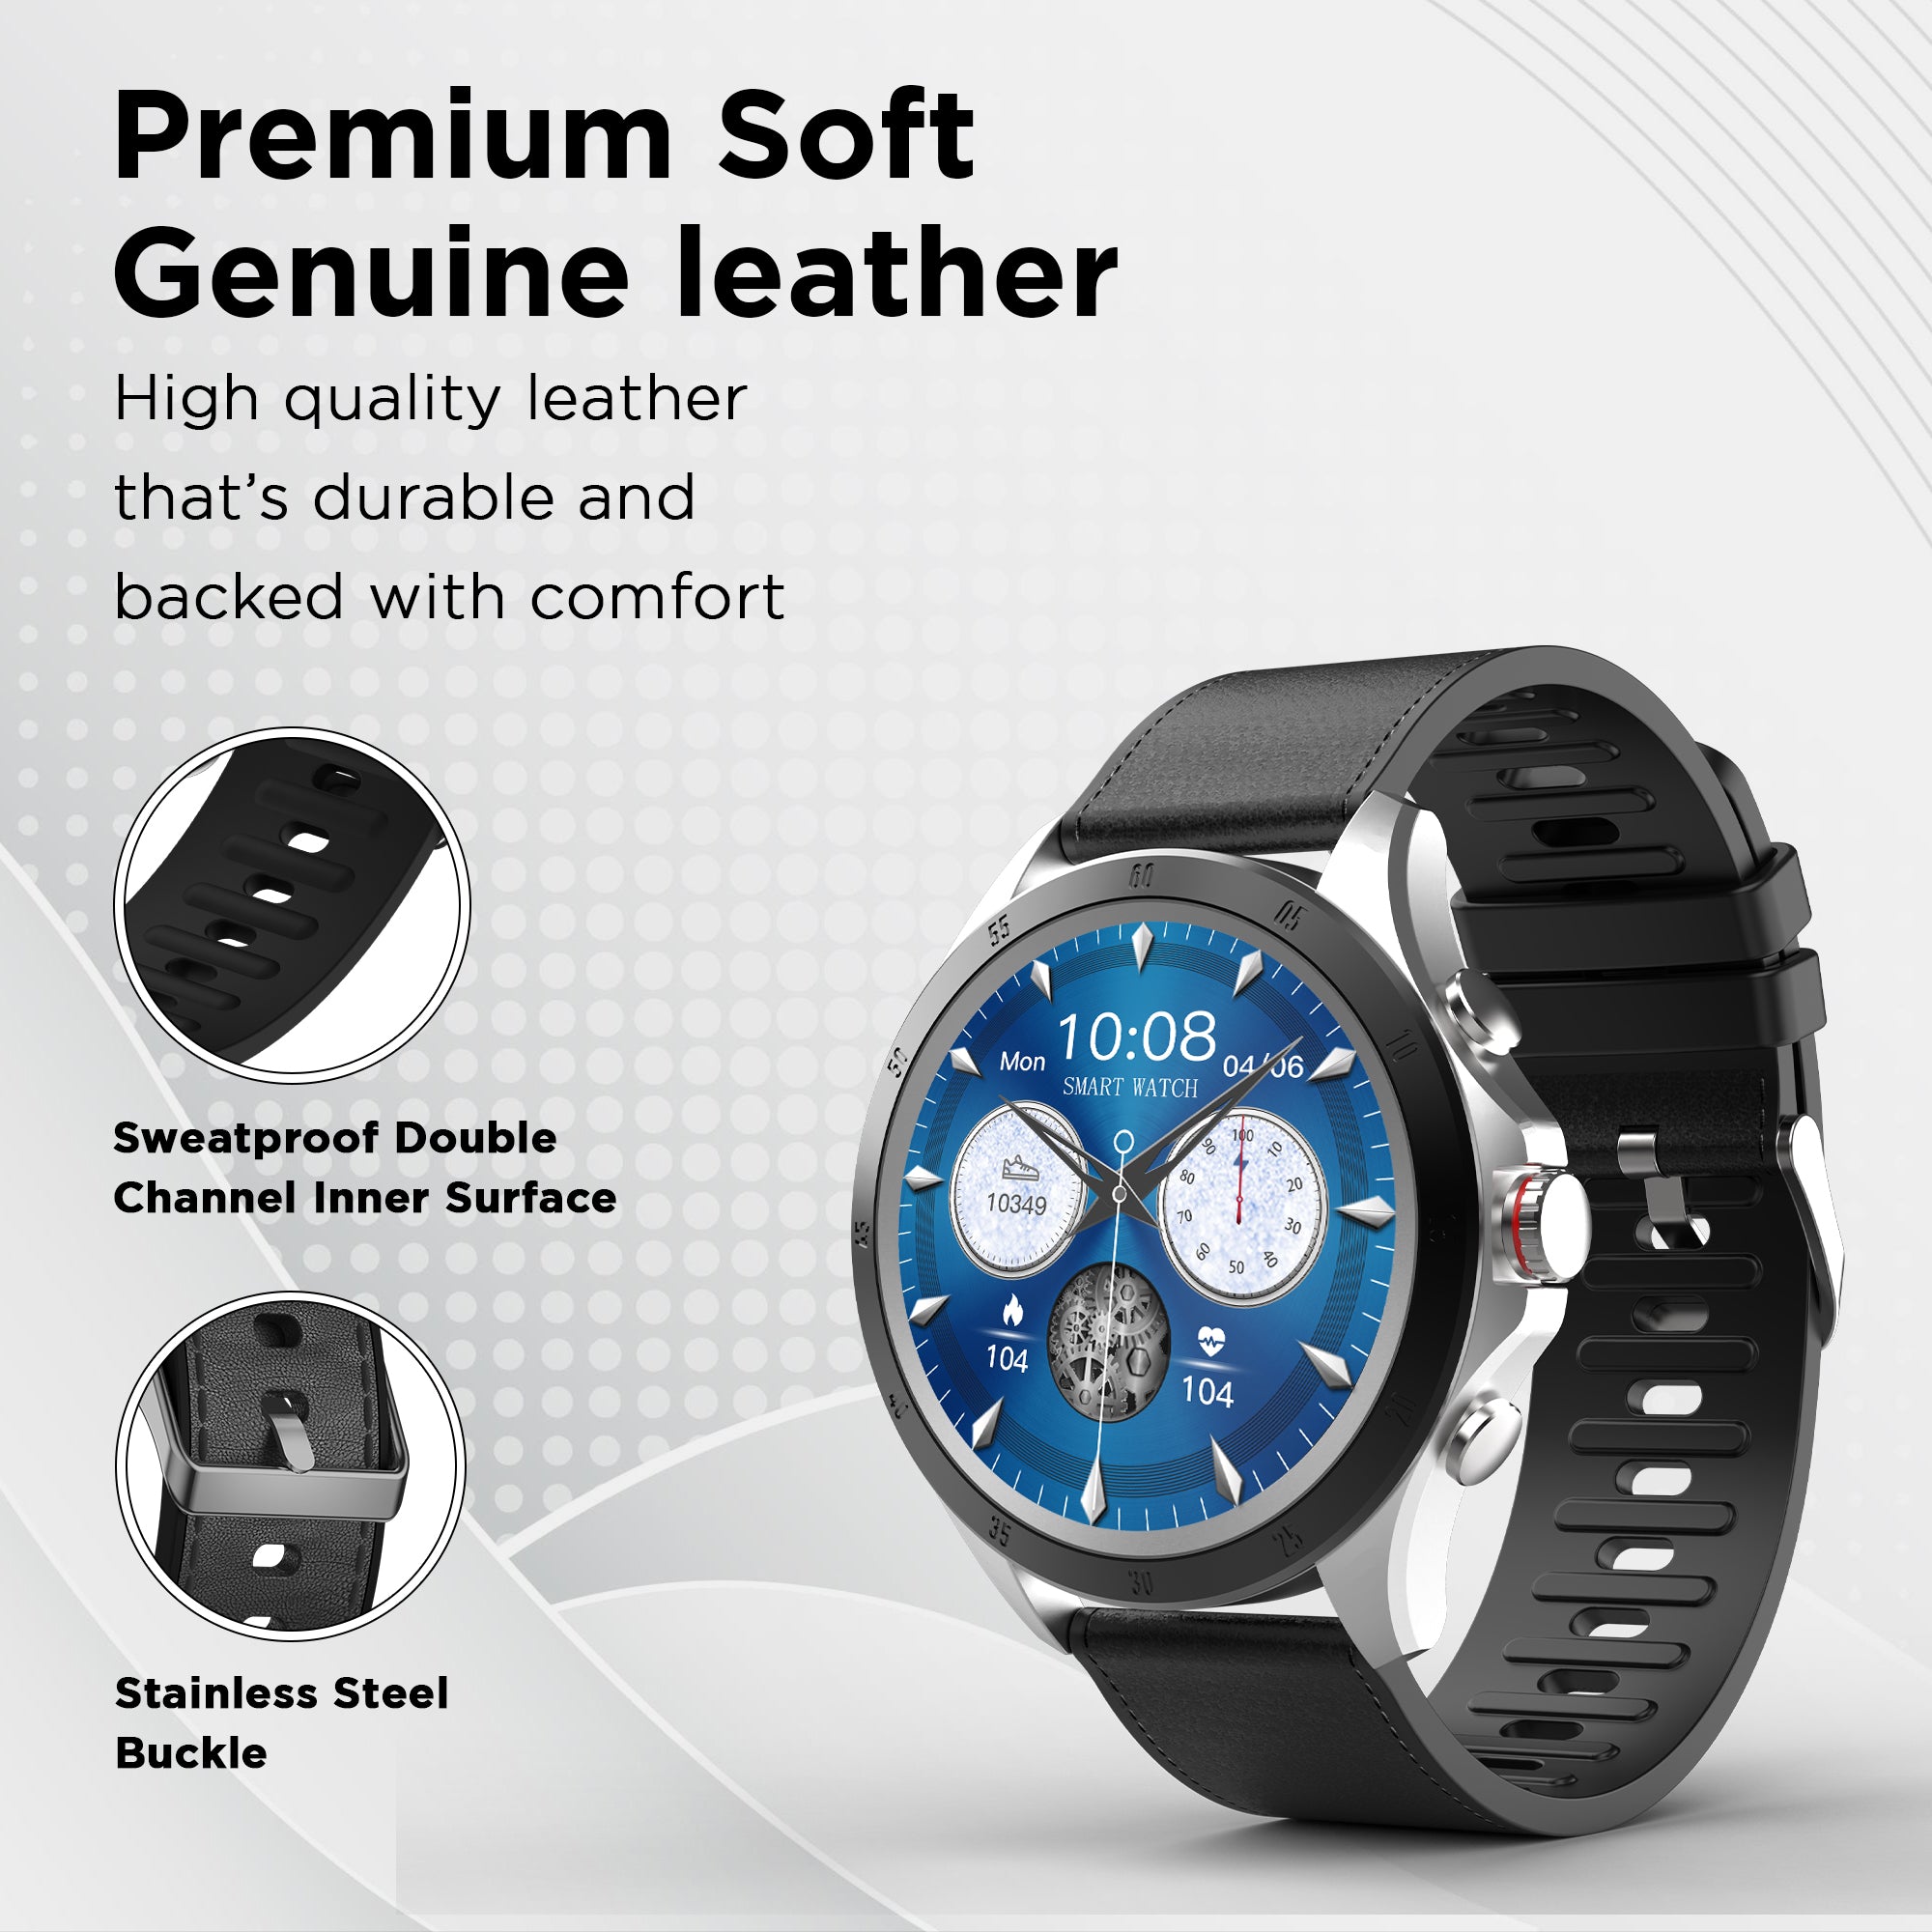 GIZMORE 22MM Leather Strap Compatible with Multiple Watches | Premium Soft Genuine Leather | Sweatproof Channel Inner Surface | Stainless Steel Buckel for Your Wrist (Black Leather Strap)